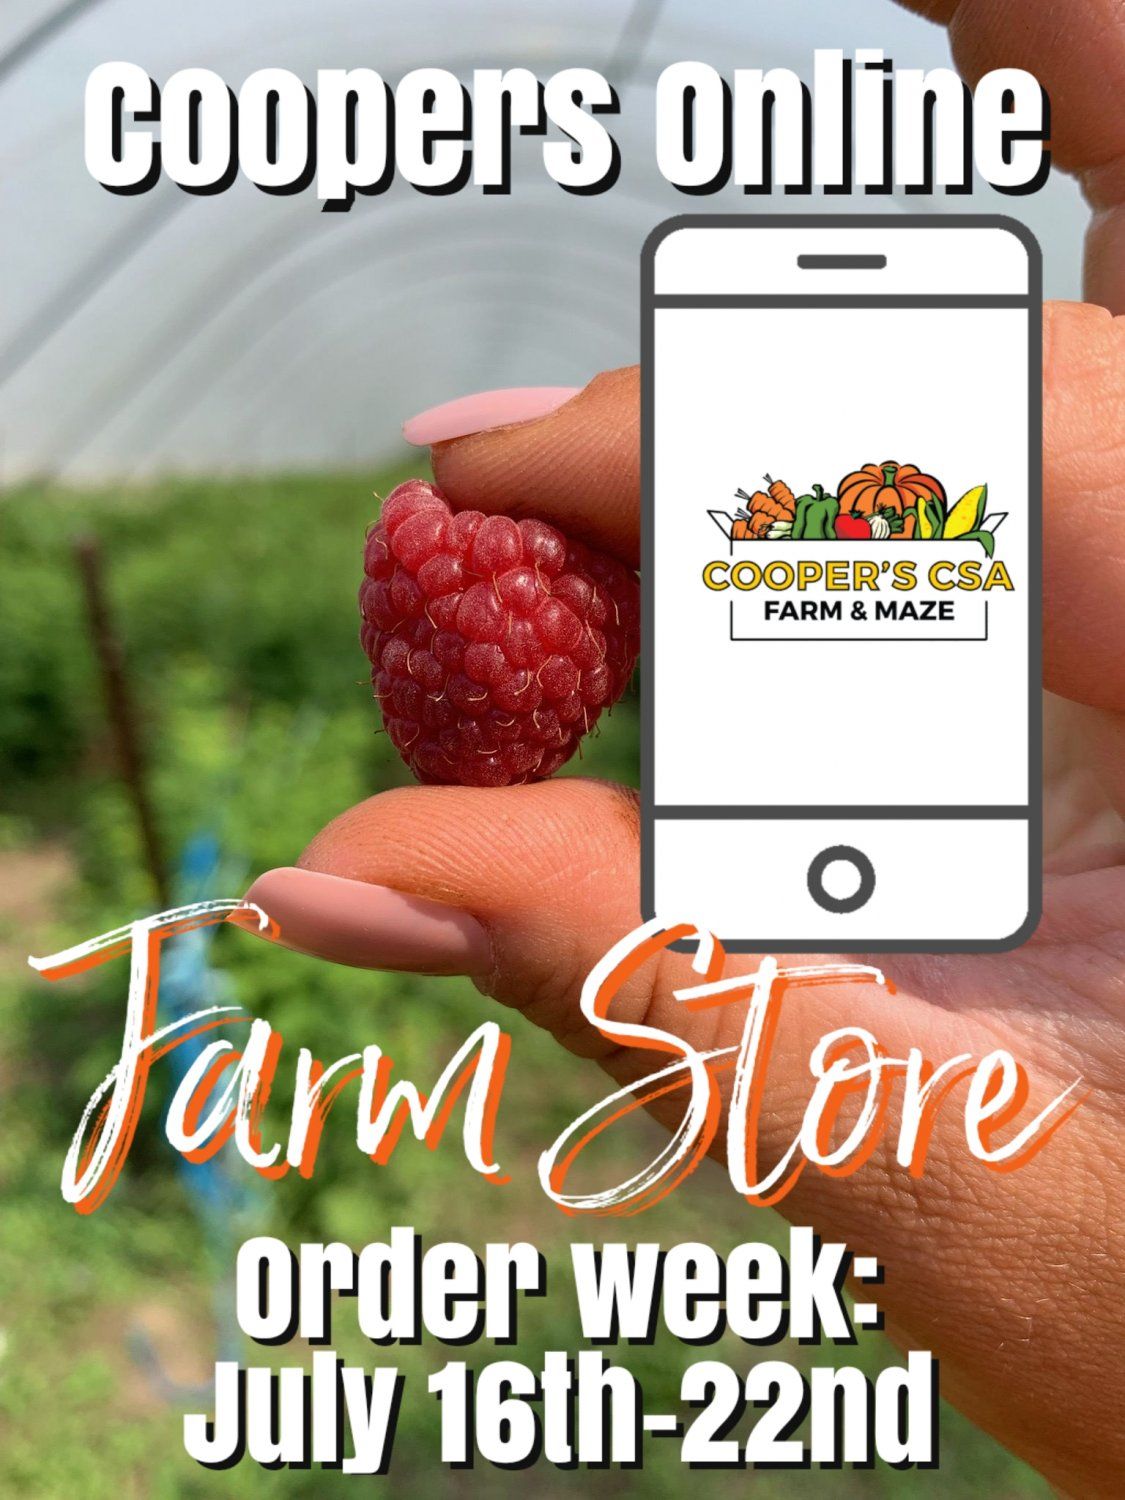 Next Happening: Coopers Online Farm Store- Order Week July 16th-22nd